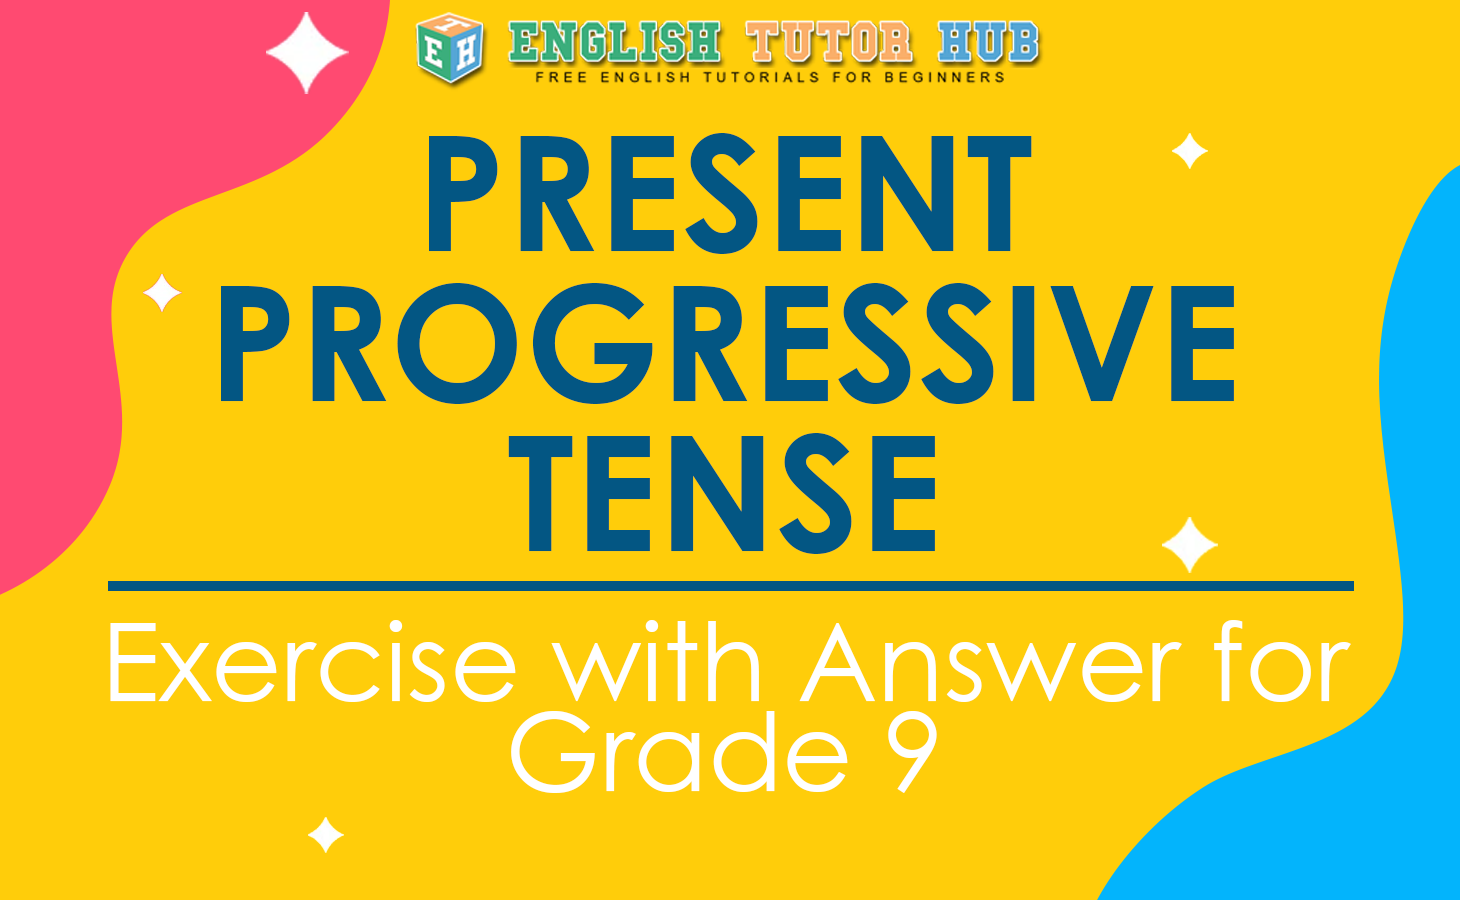 Present Progressive Tense Exercise with Answer for Grade 9